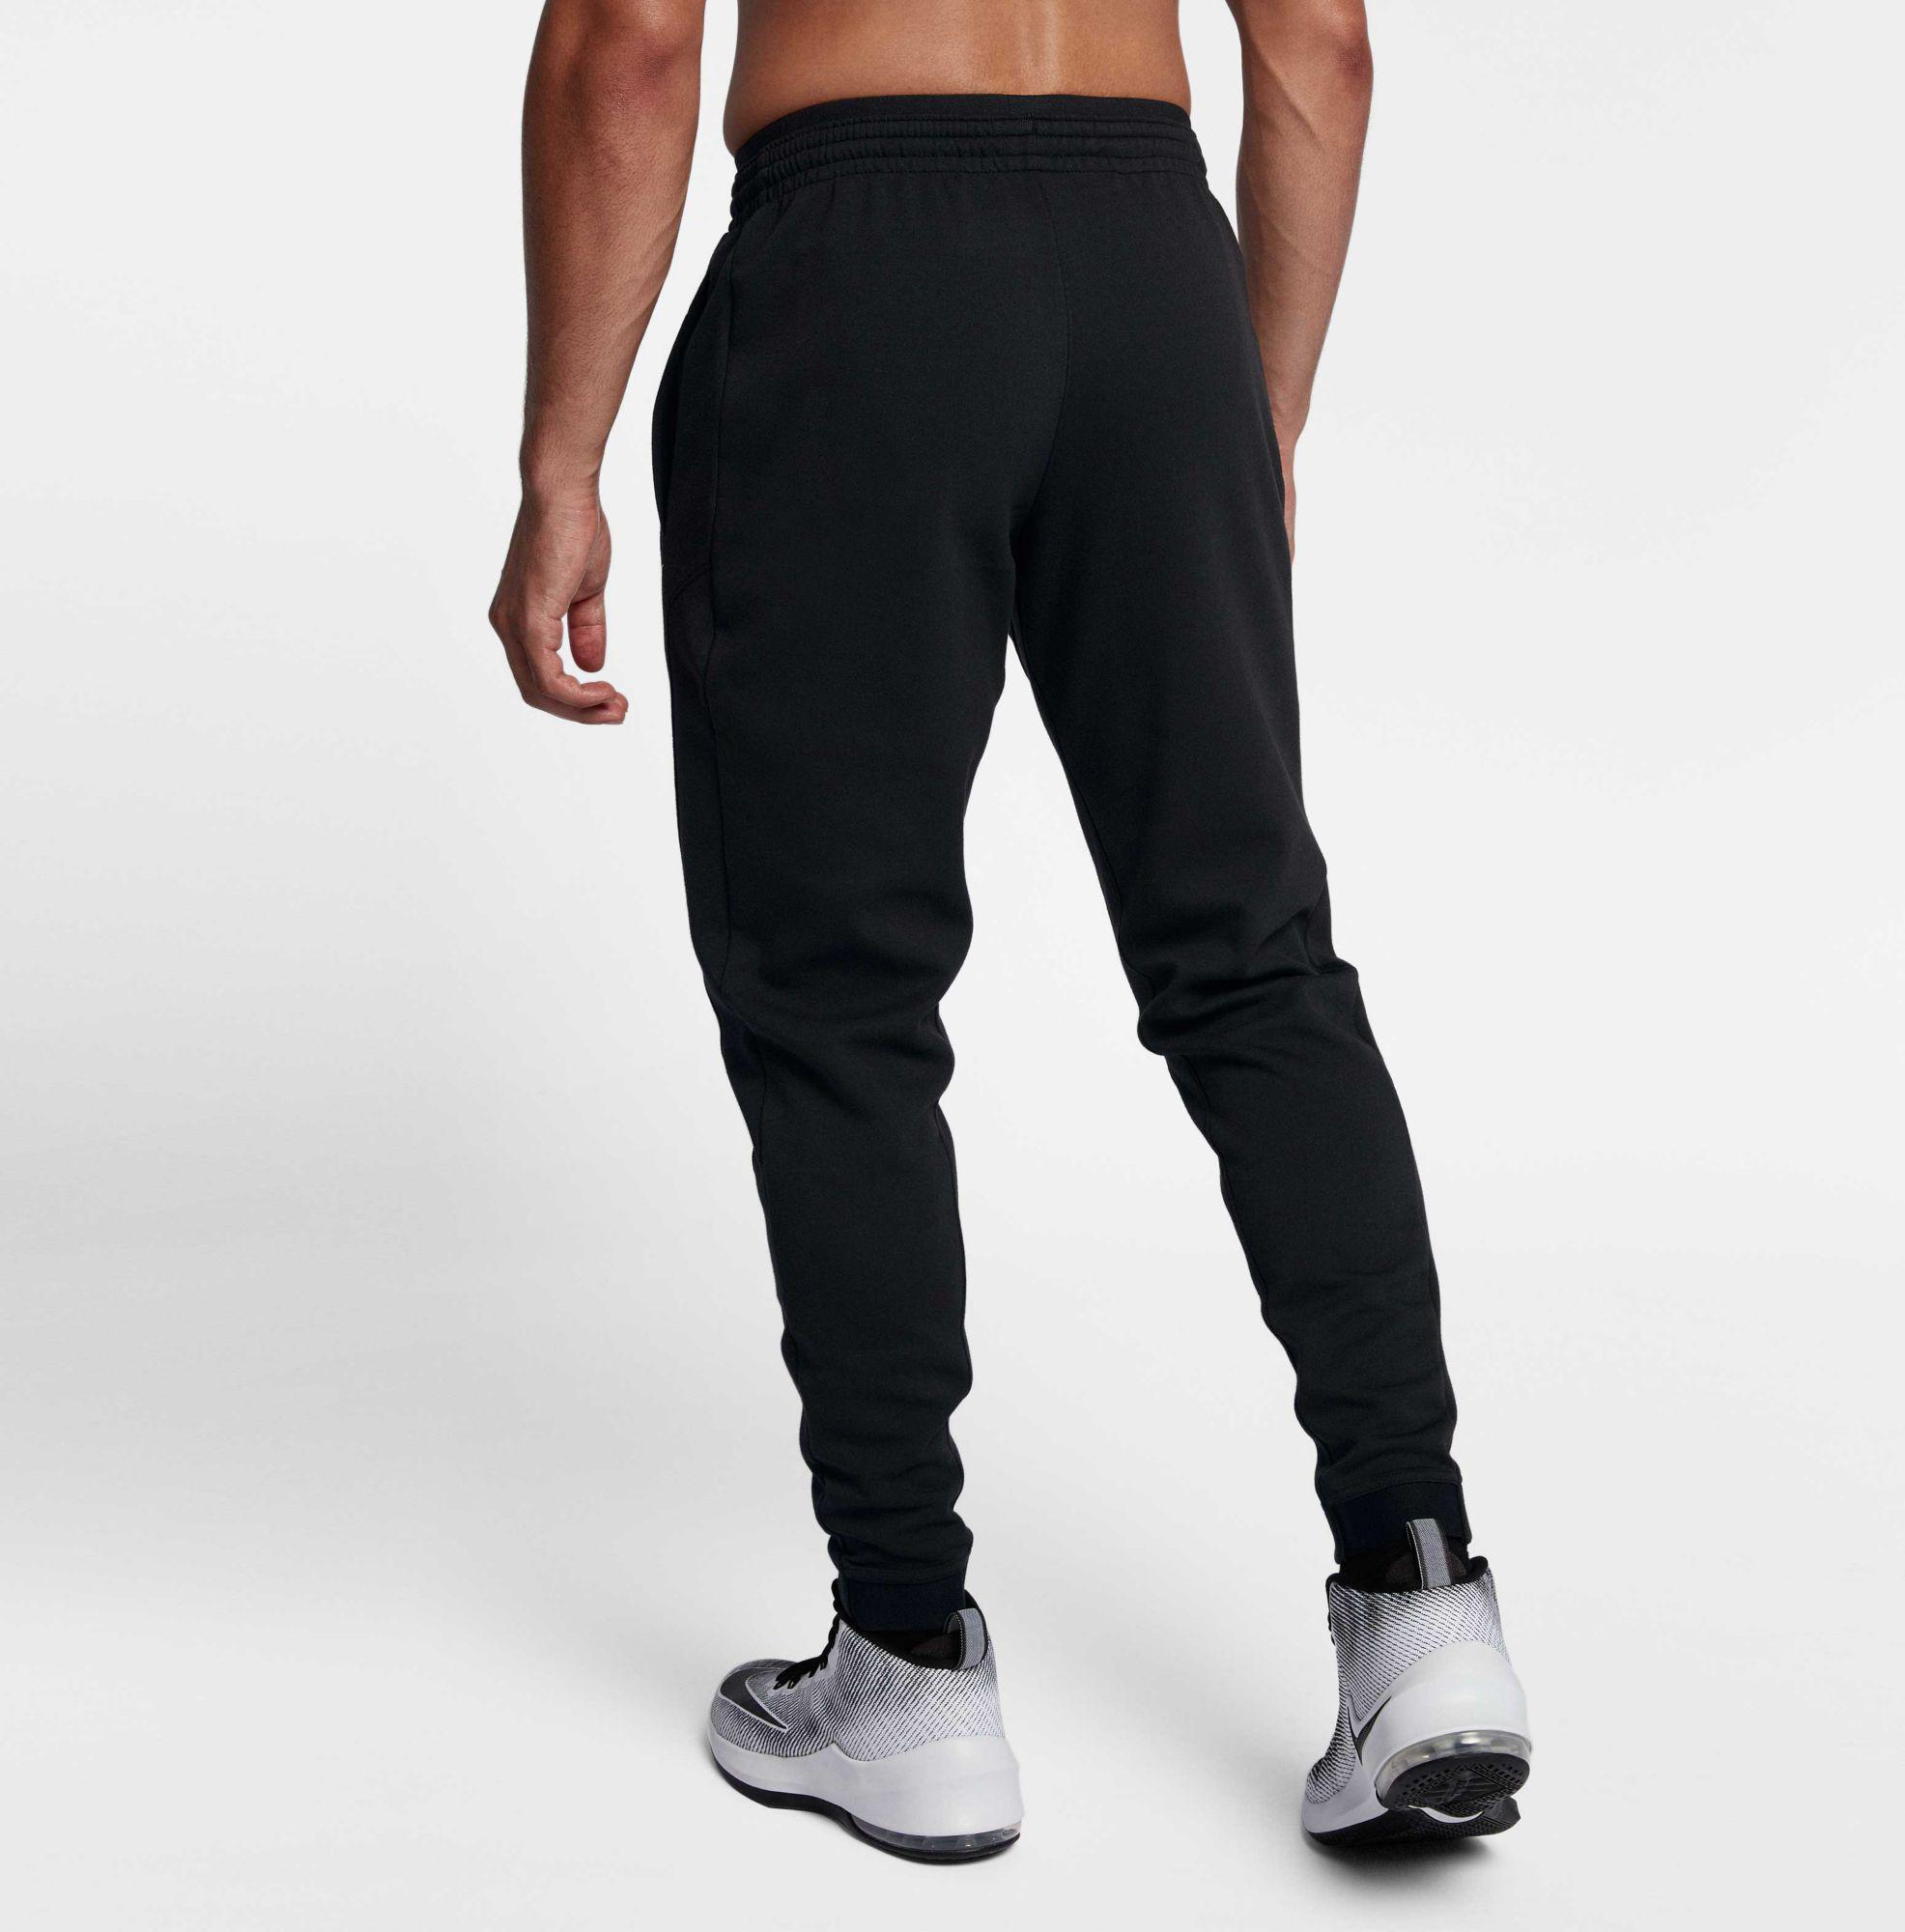 Nike Synthetic Dry Showtime Basketball Pants in Black for Men - Lyst